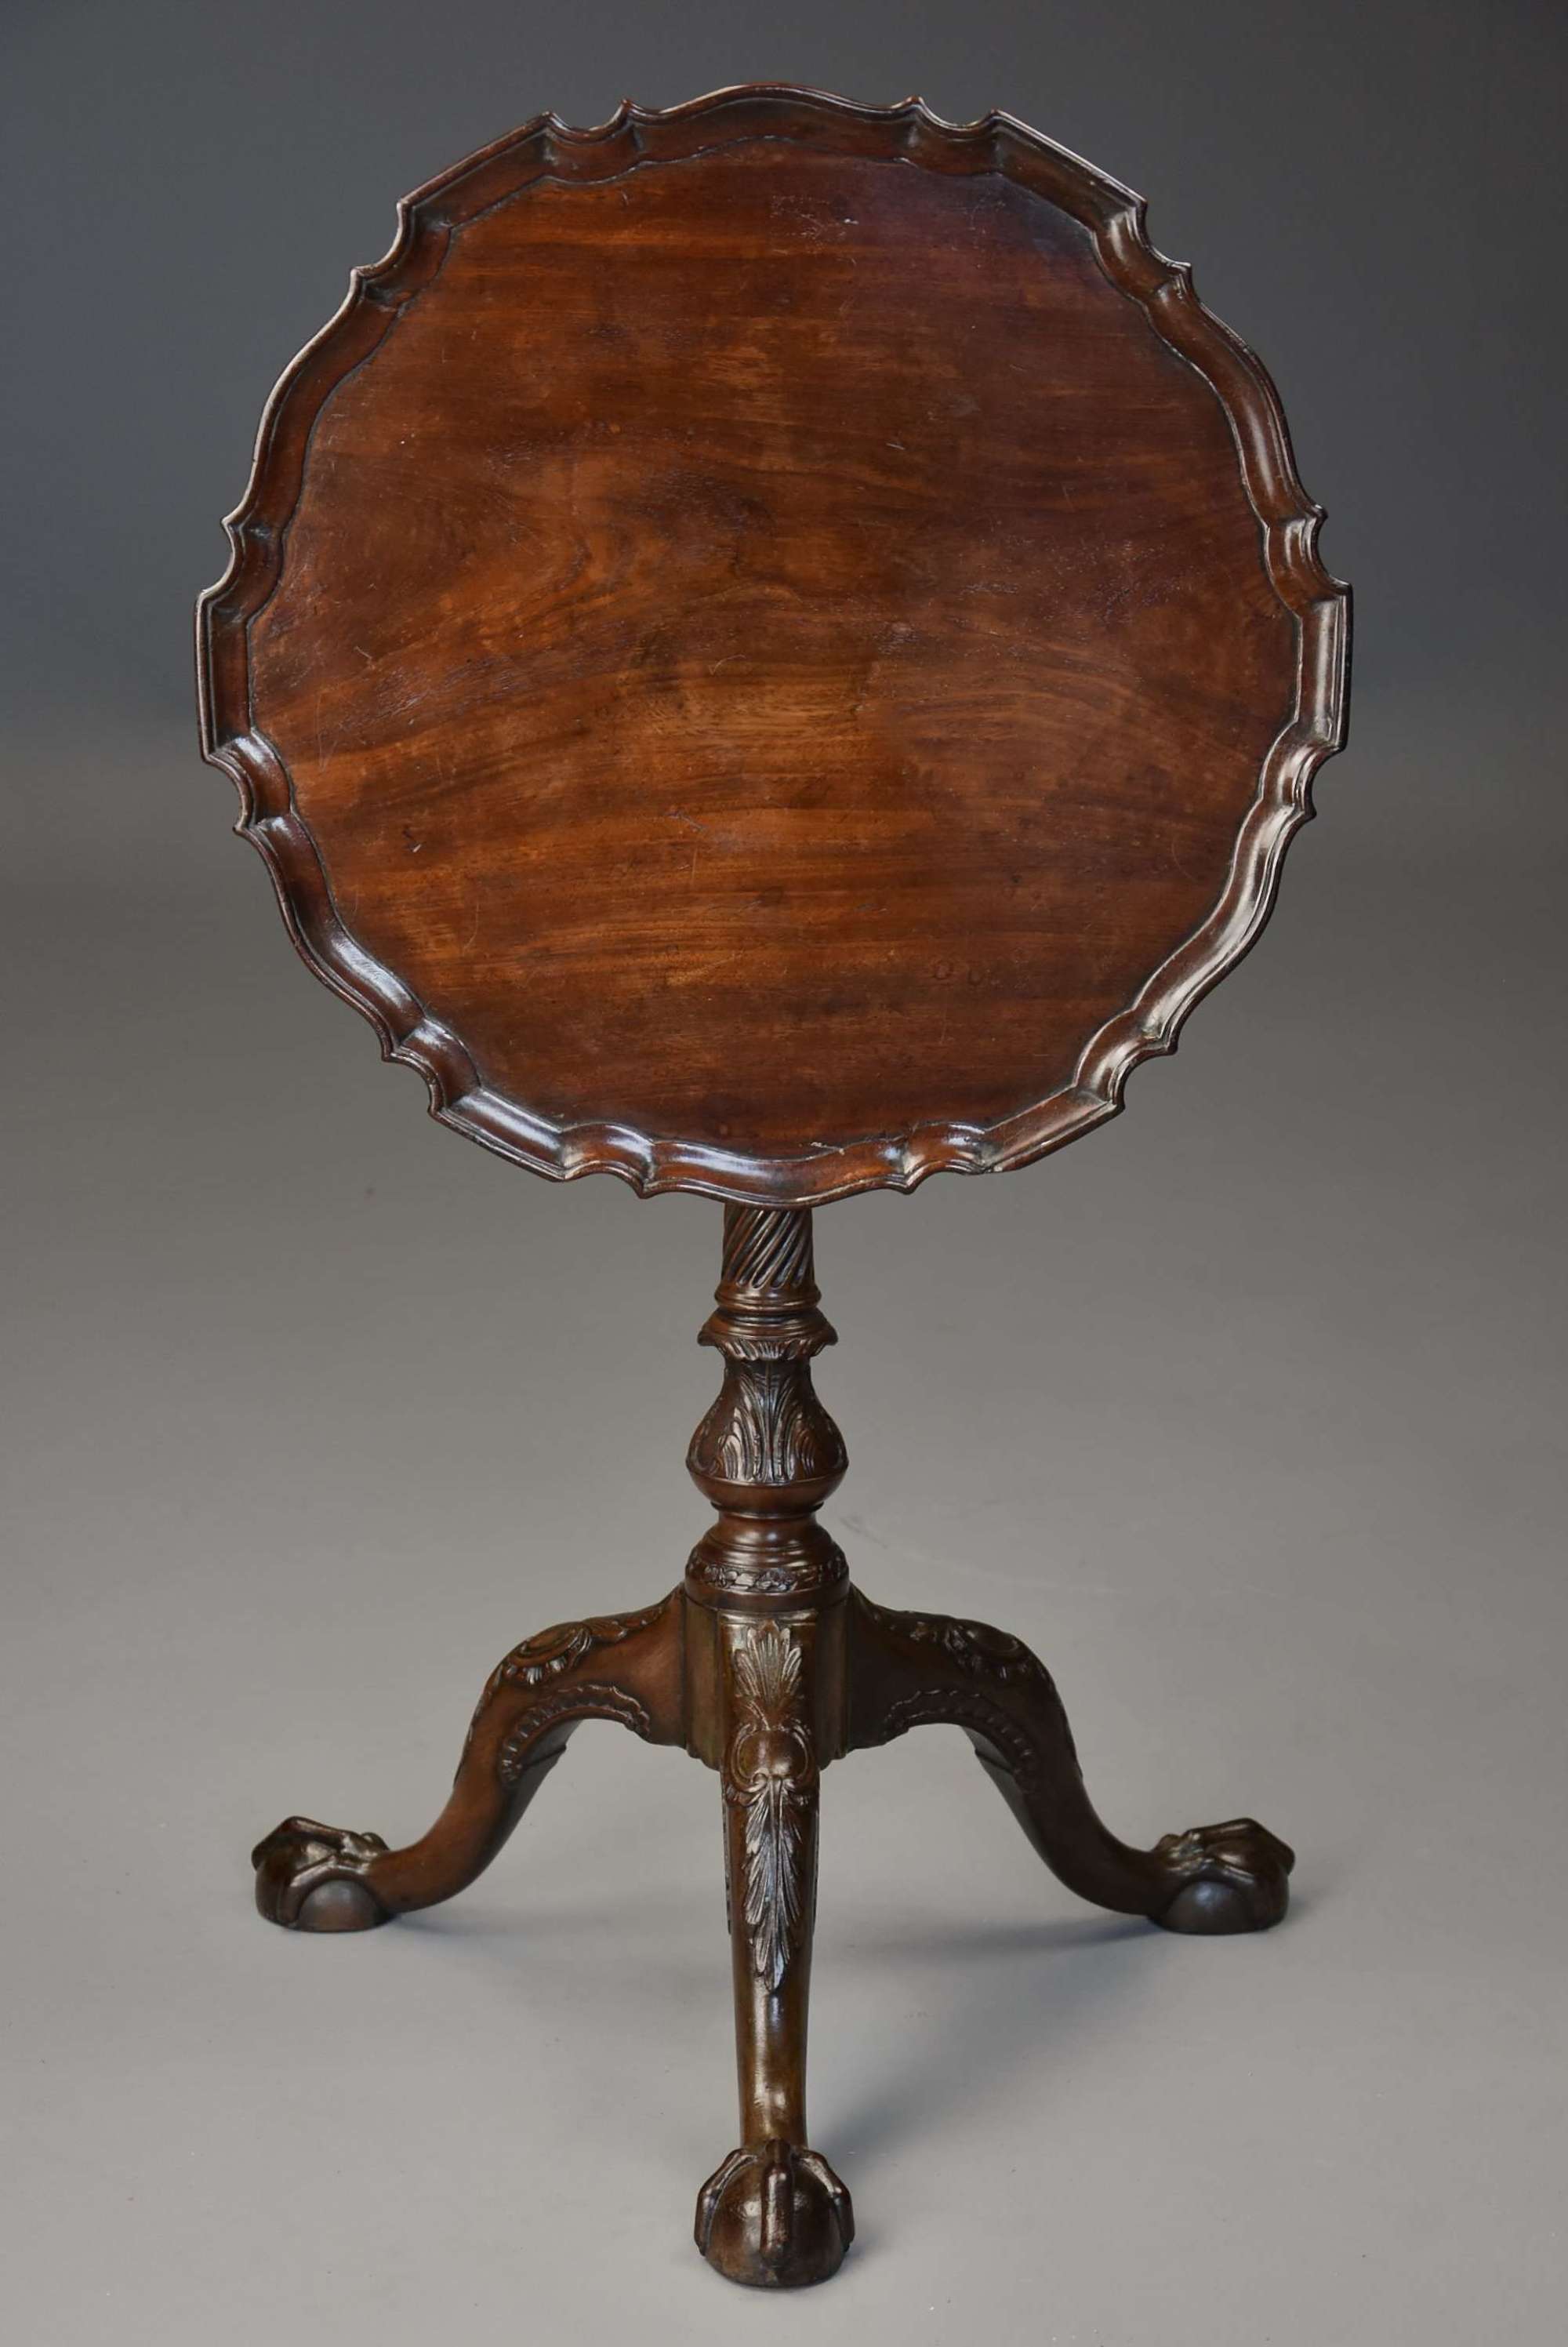 19thc Chippendale style mahogany tripod table of small proportions